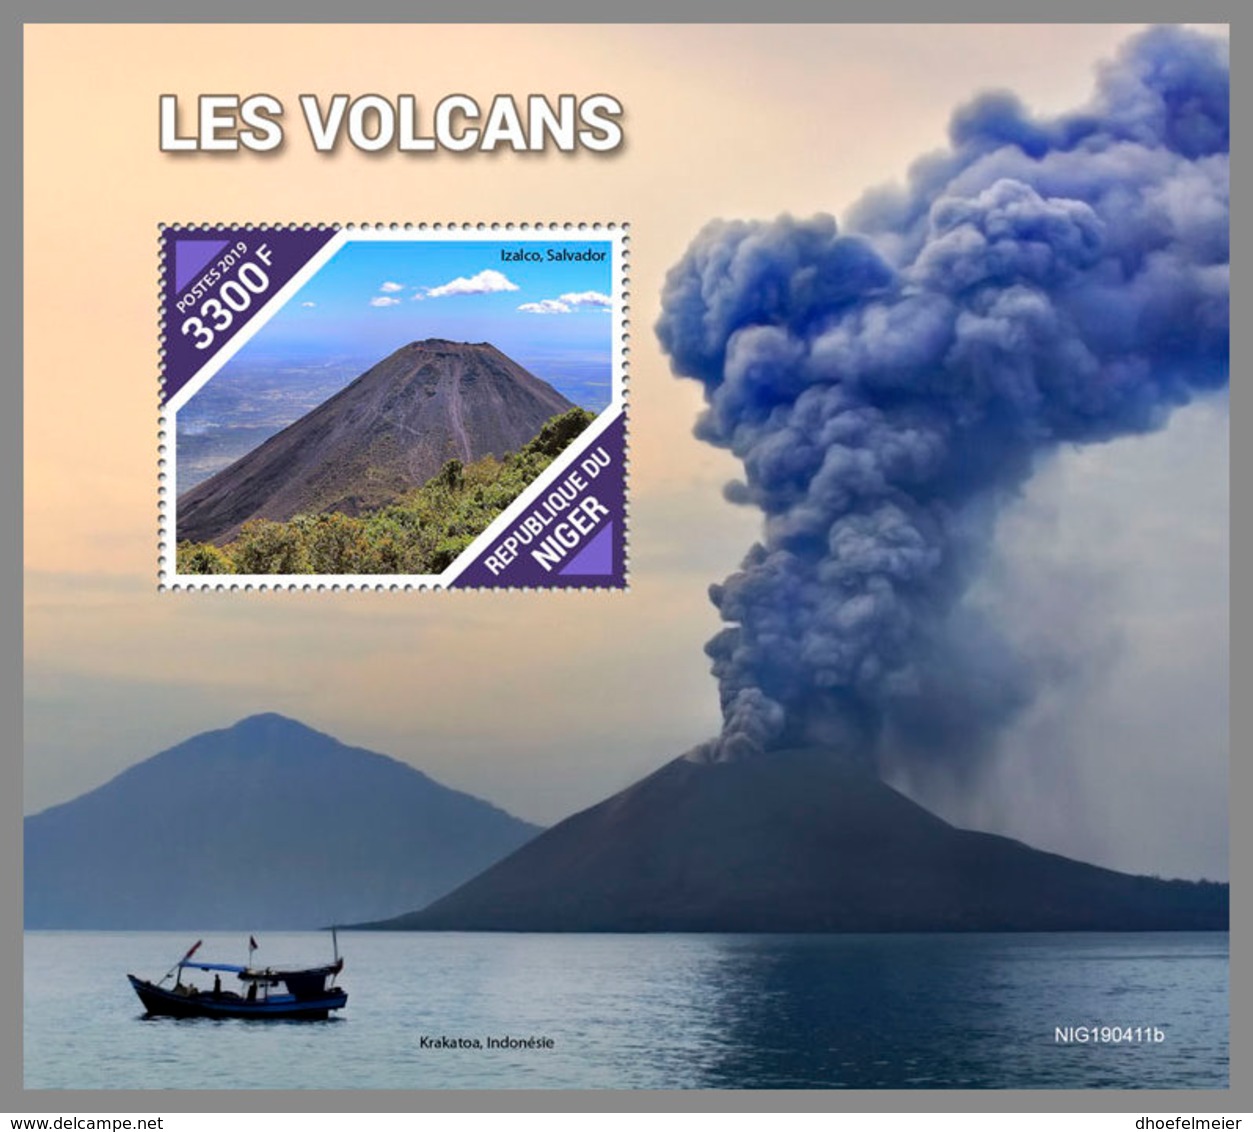 NIGER 2019 MNH Volcanoes Vilkane Volcans S/S - IMPERFORATED - DH1939 - Volcans